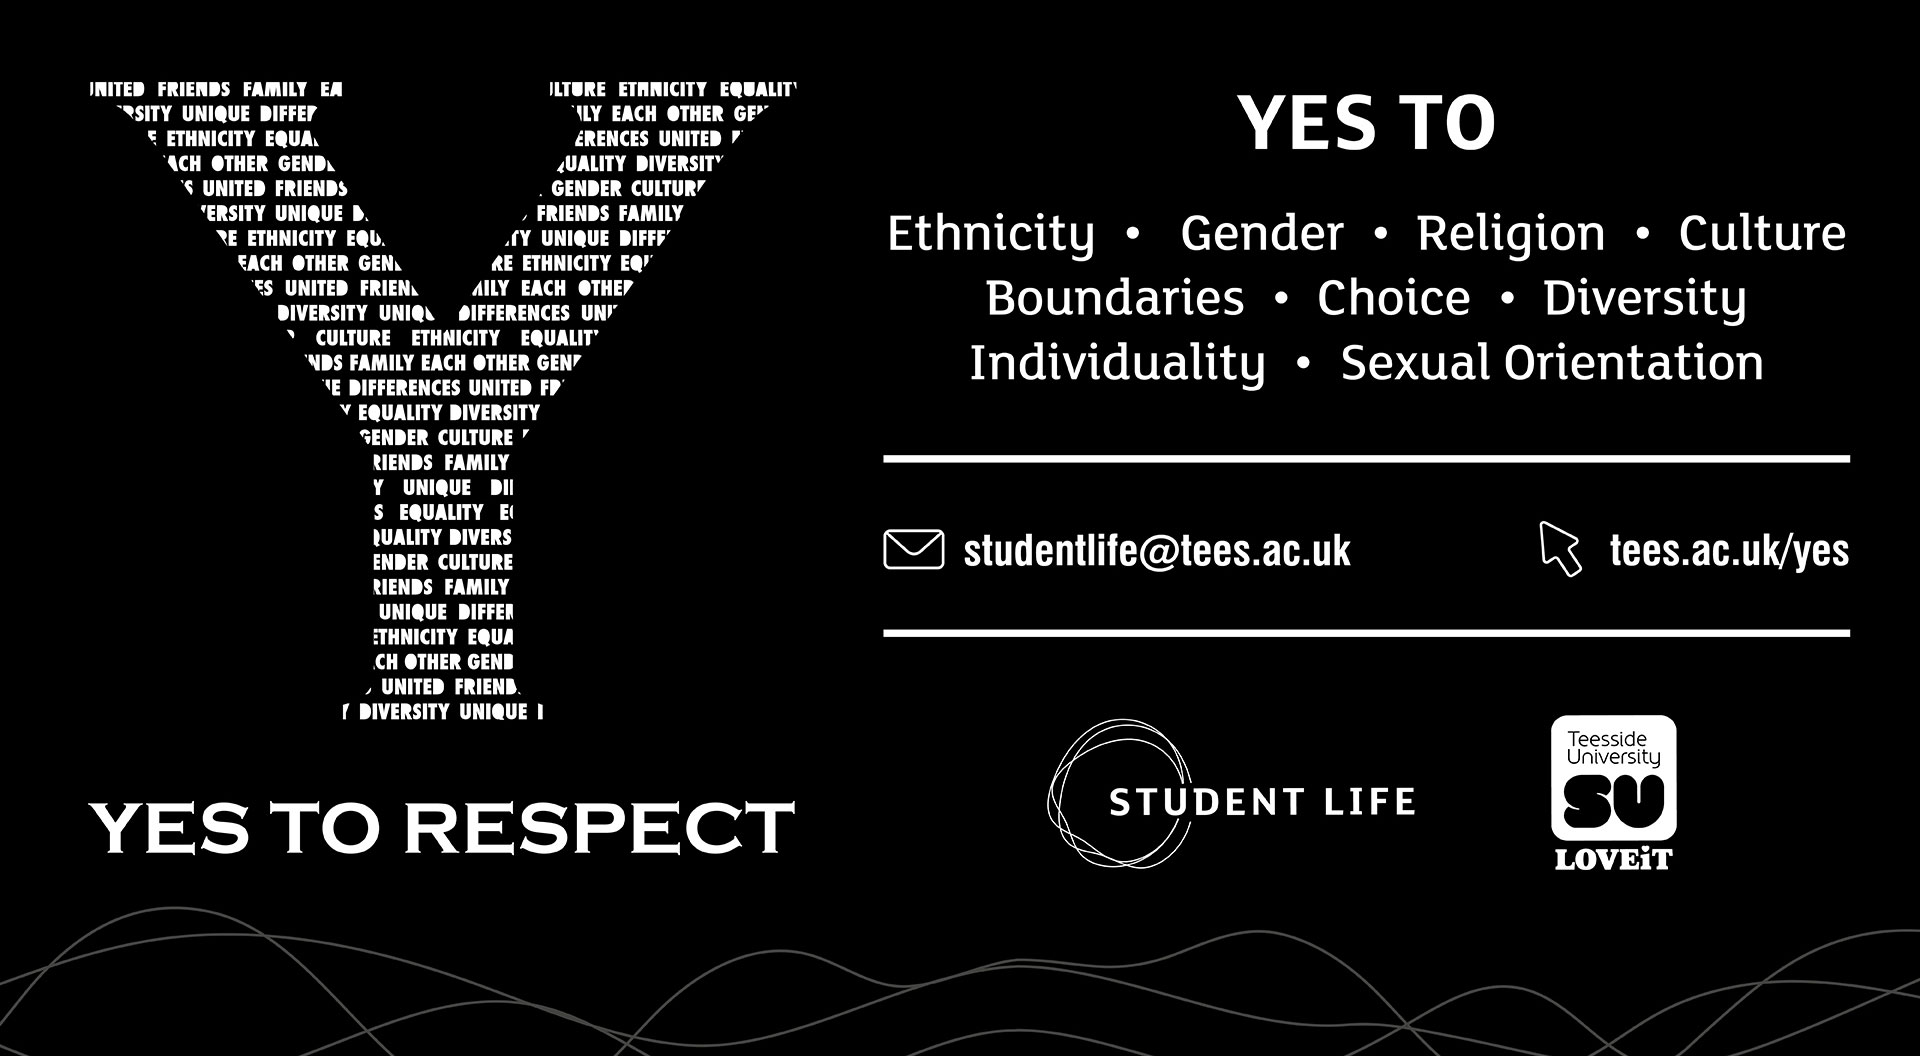 The Yes To Respect logo